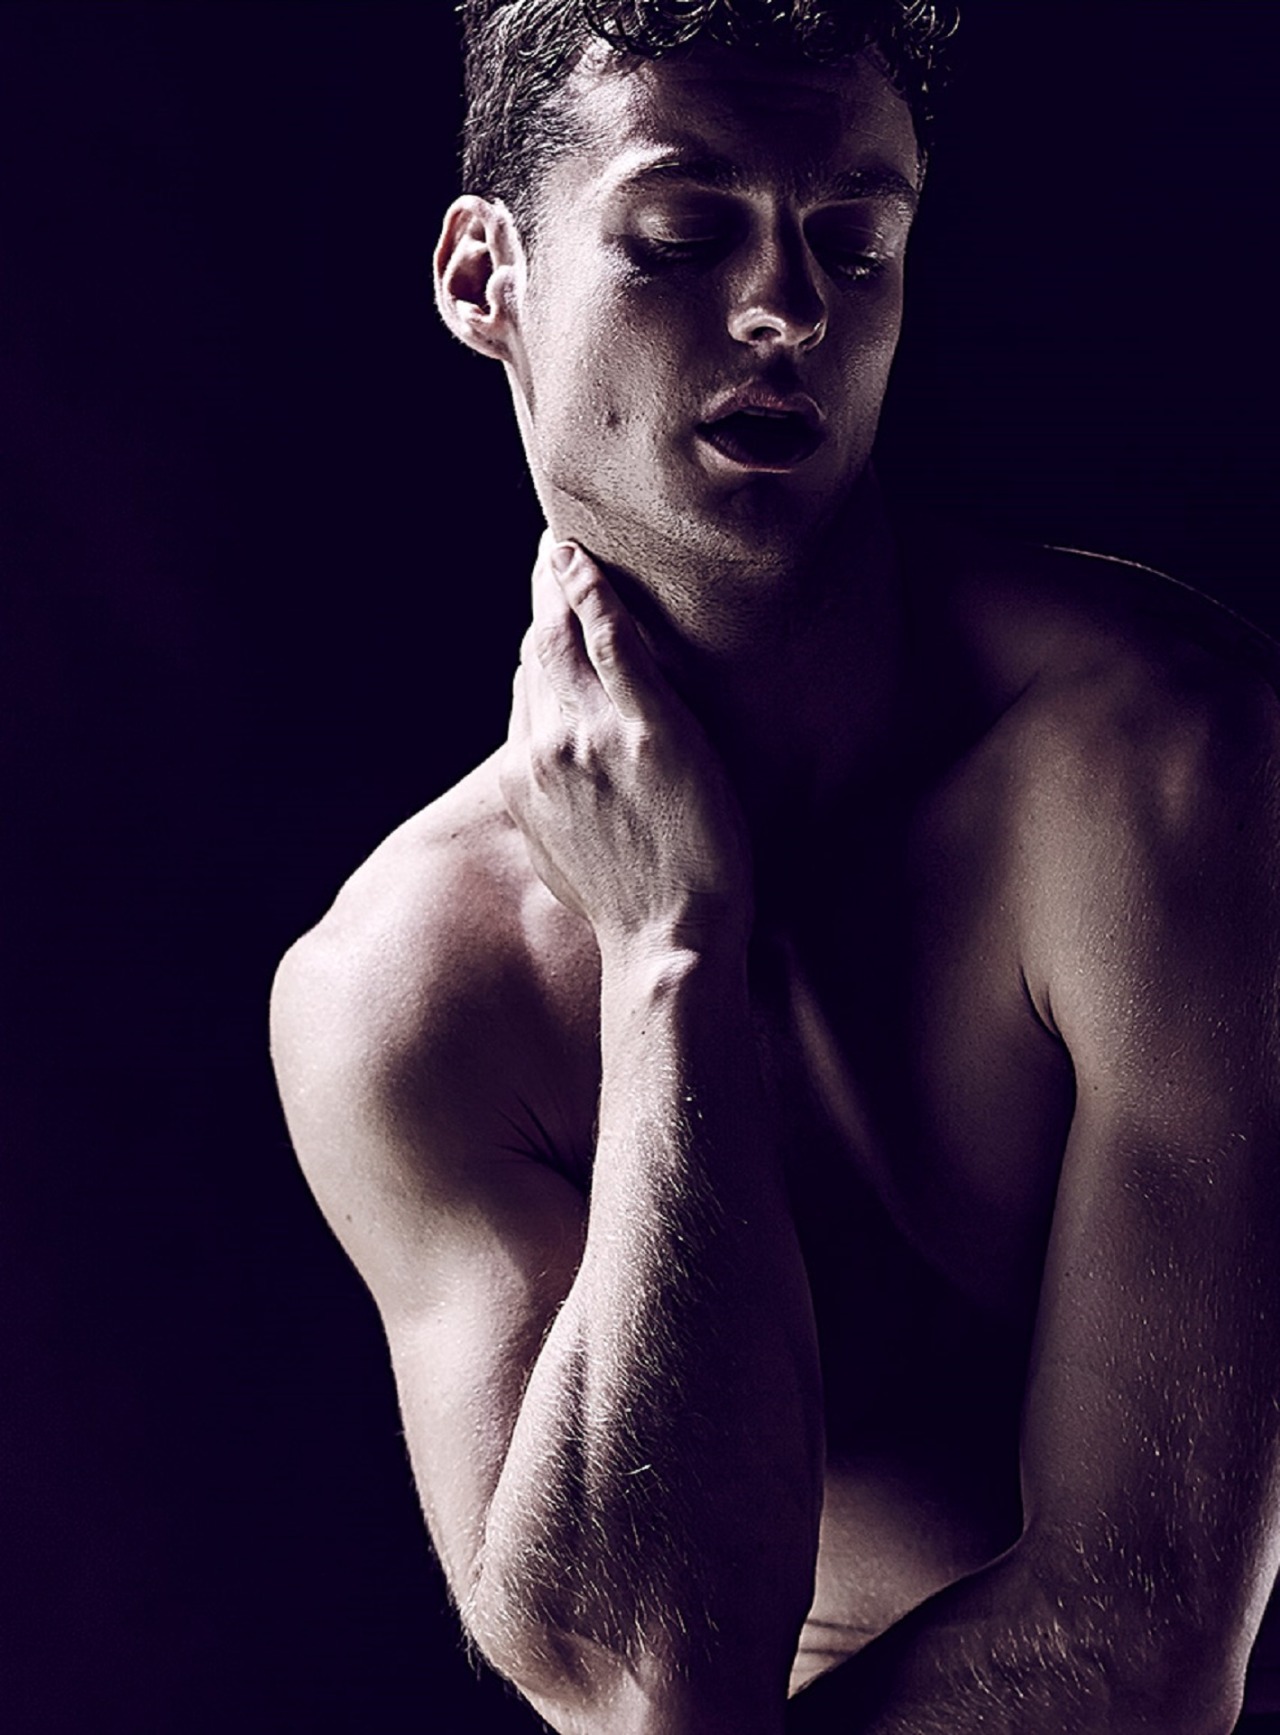 banging-the-boy:     Obsession No#6… Max Papendieck Photographed by Daniel Jaems